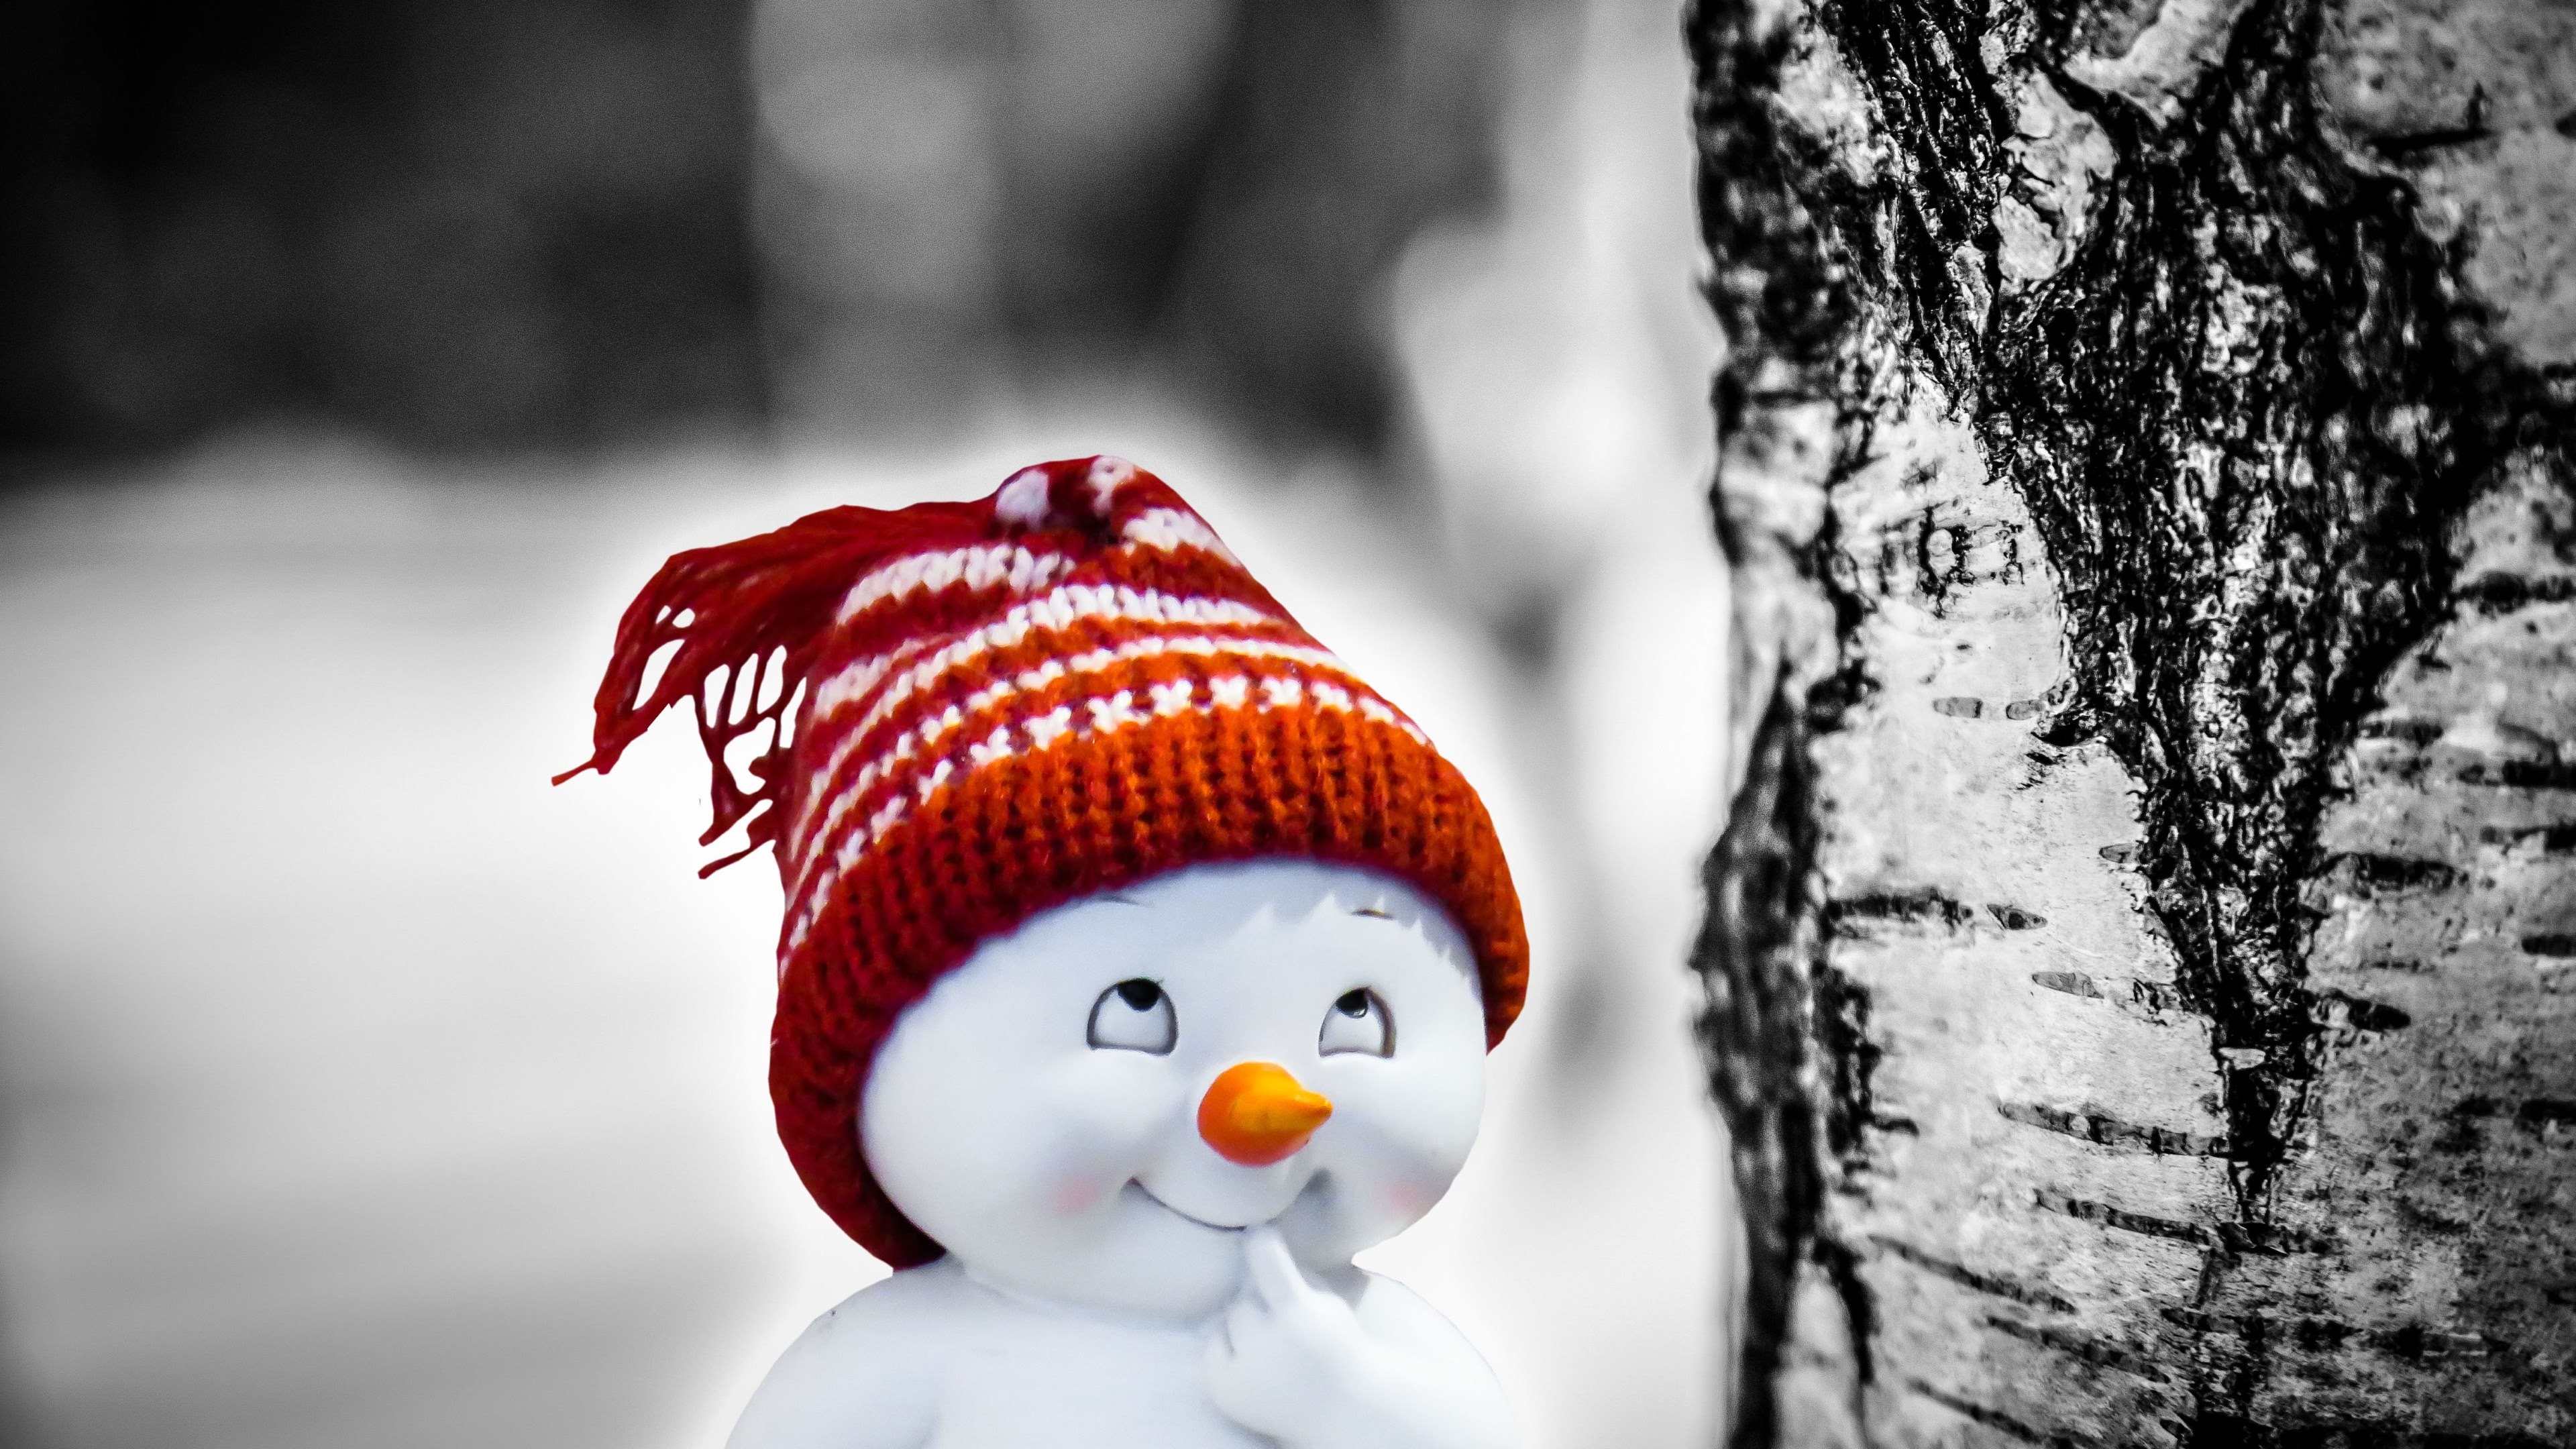 Snowman Wallpapers, Pictures, Images